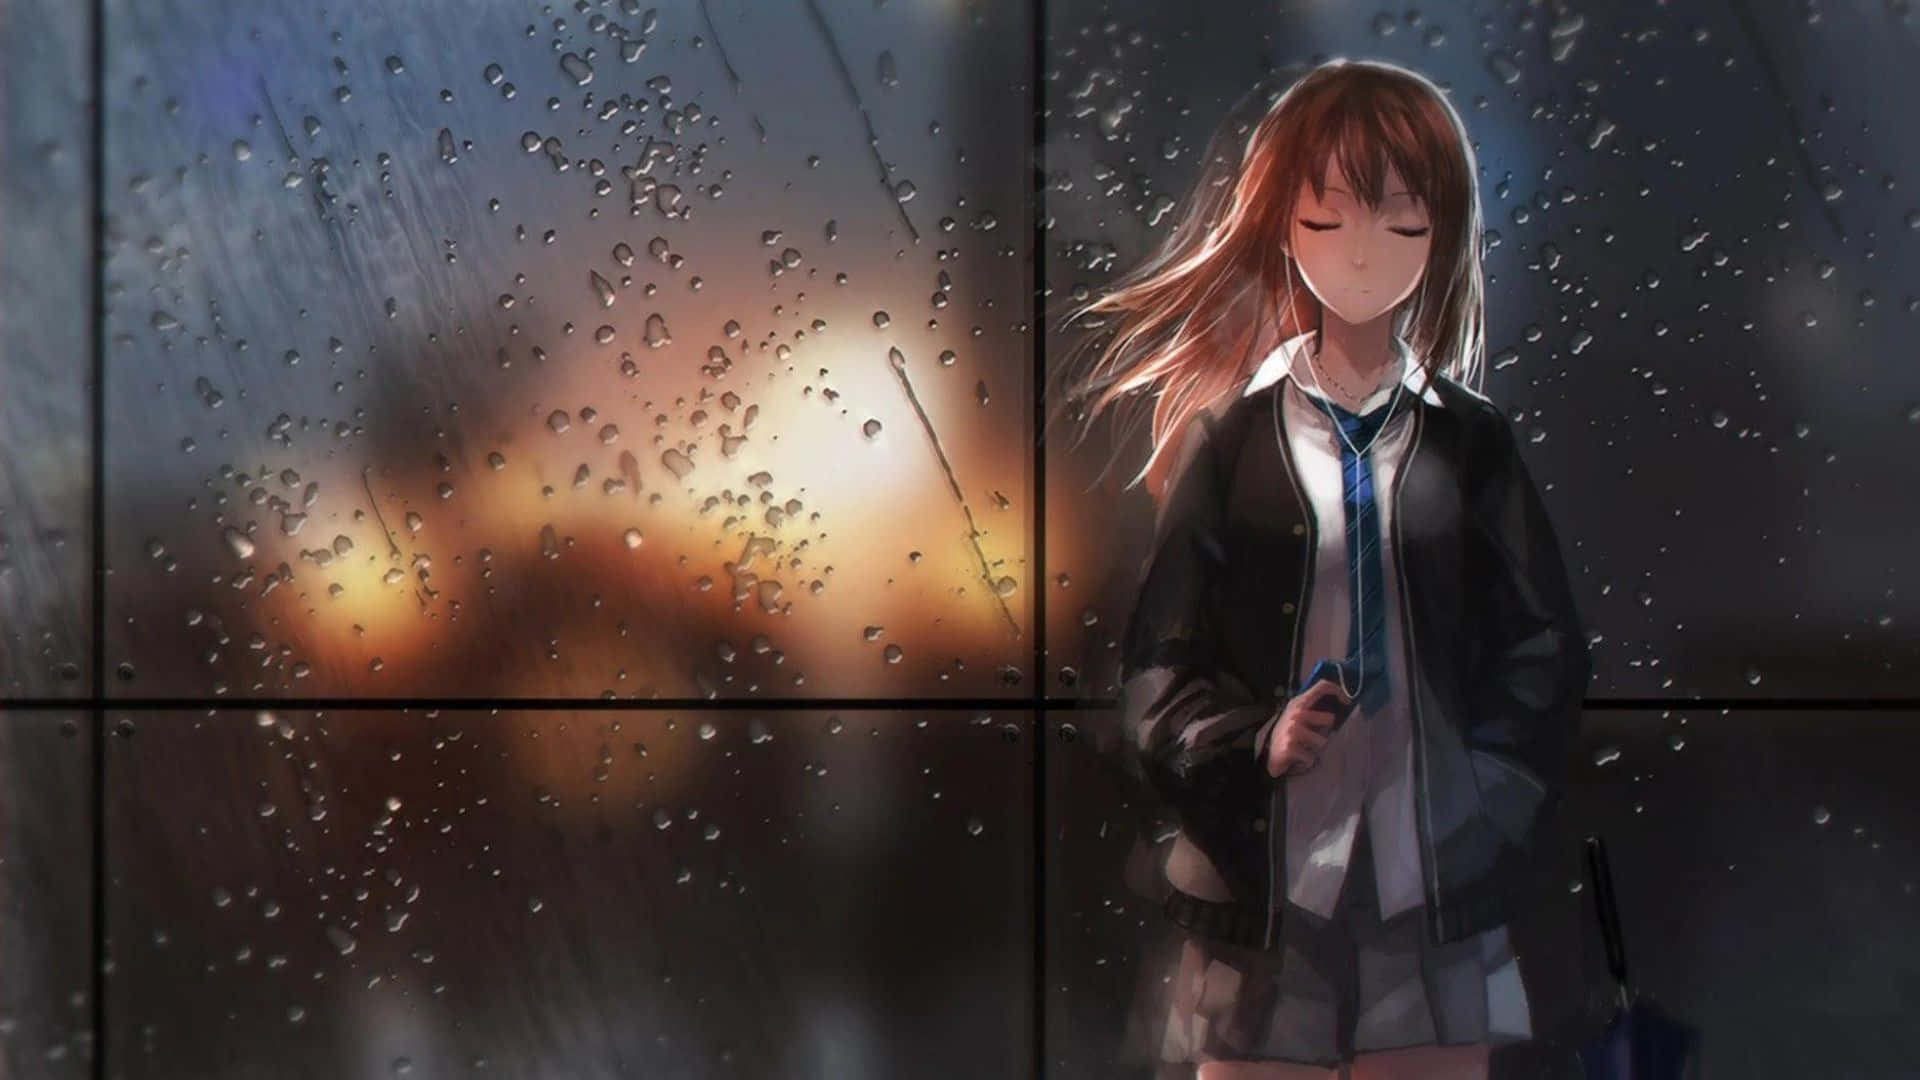 A rainy anime background with people walking without umbrella